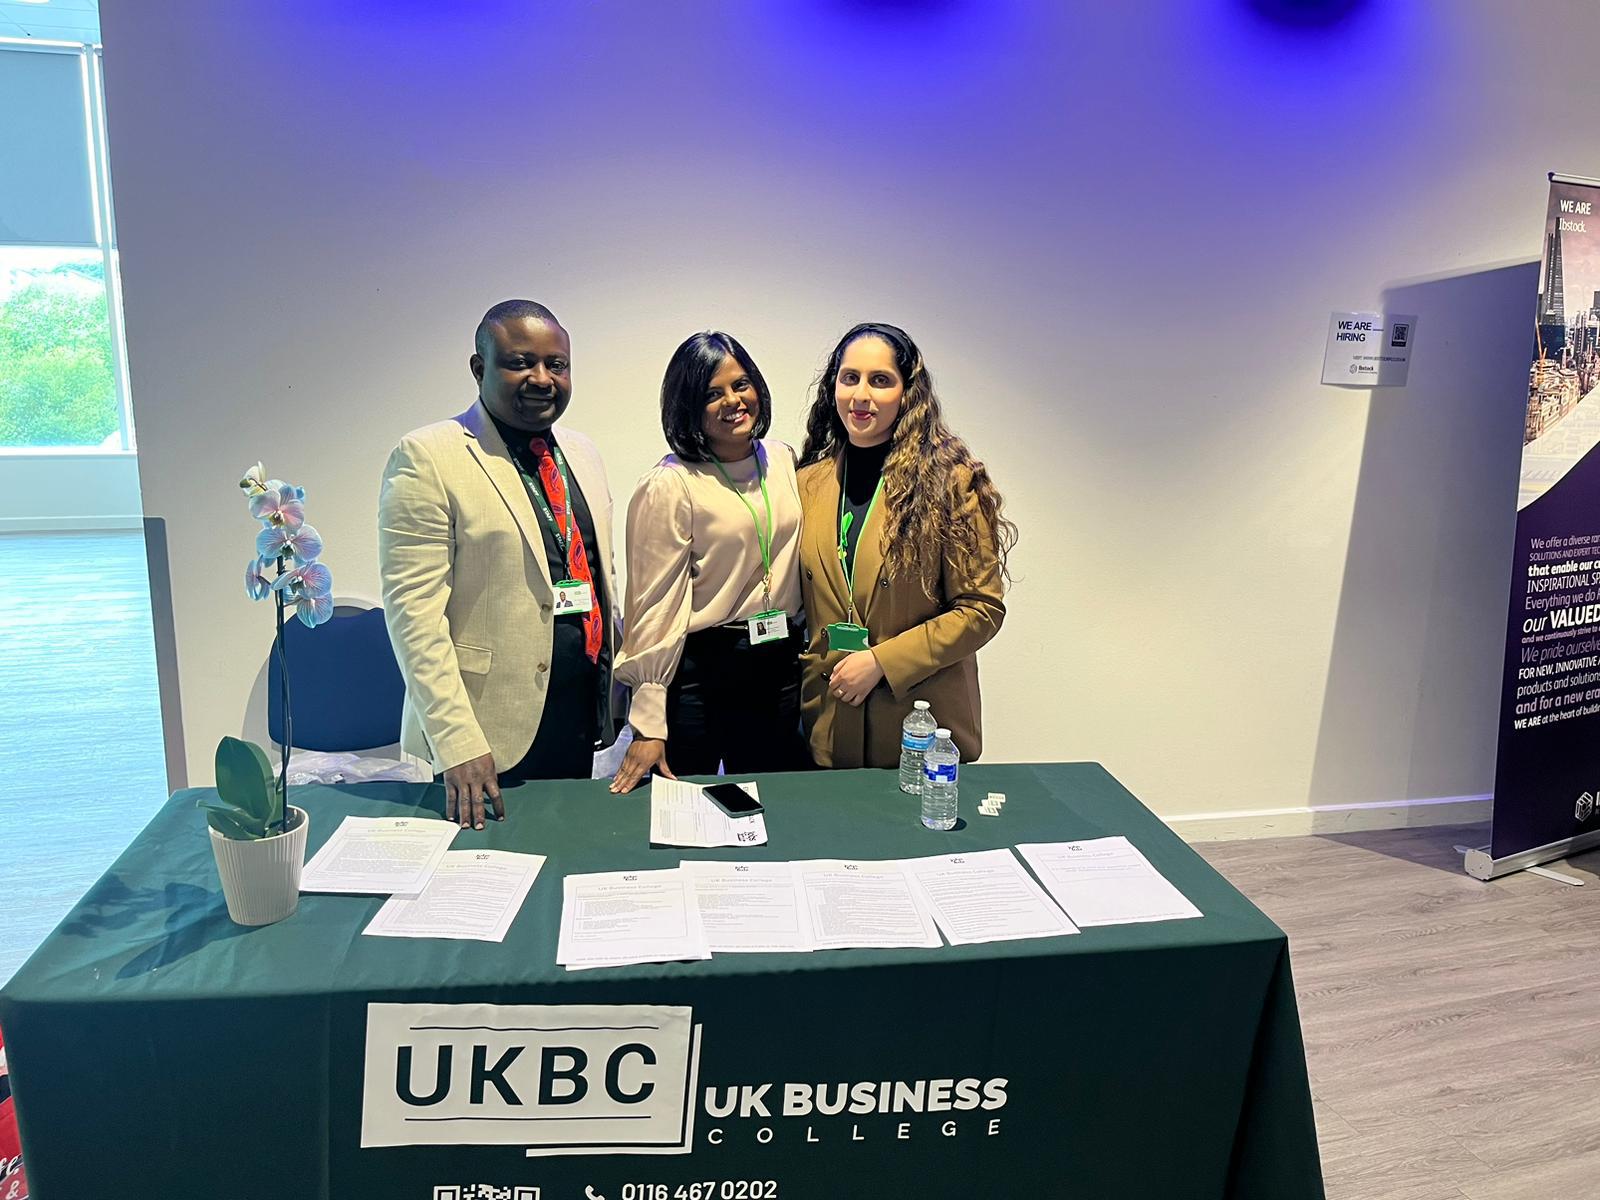 UK Business College at our event in Leicester